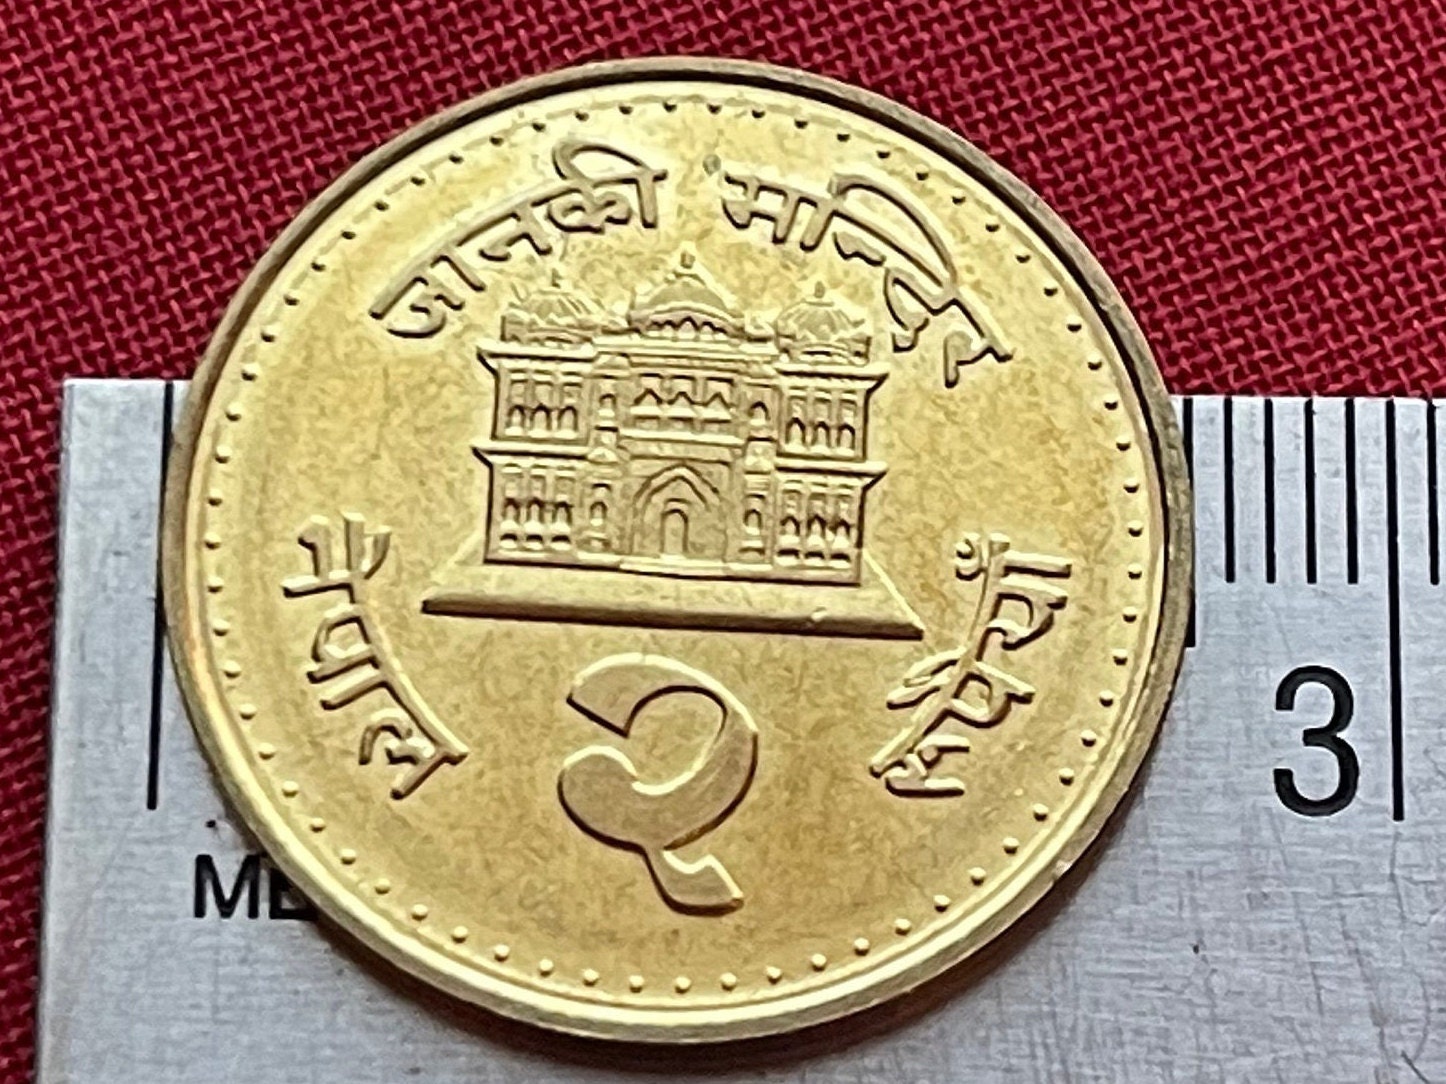 Janaki Mandir 2 Rupees Nepal Authentic Coin Money for Jewelry and Craft Making (Goddess Sita) (Hindu Symbols) (Miracle Coin)